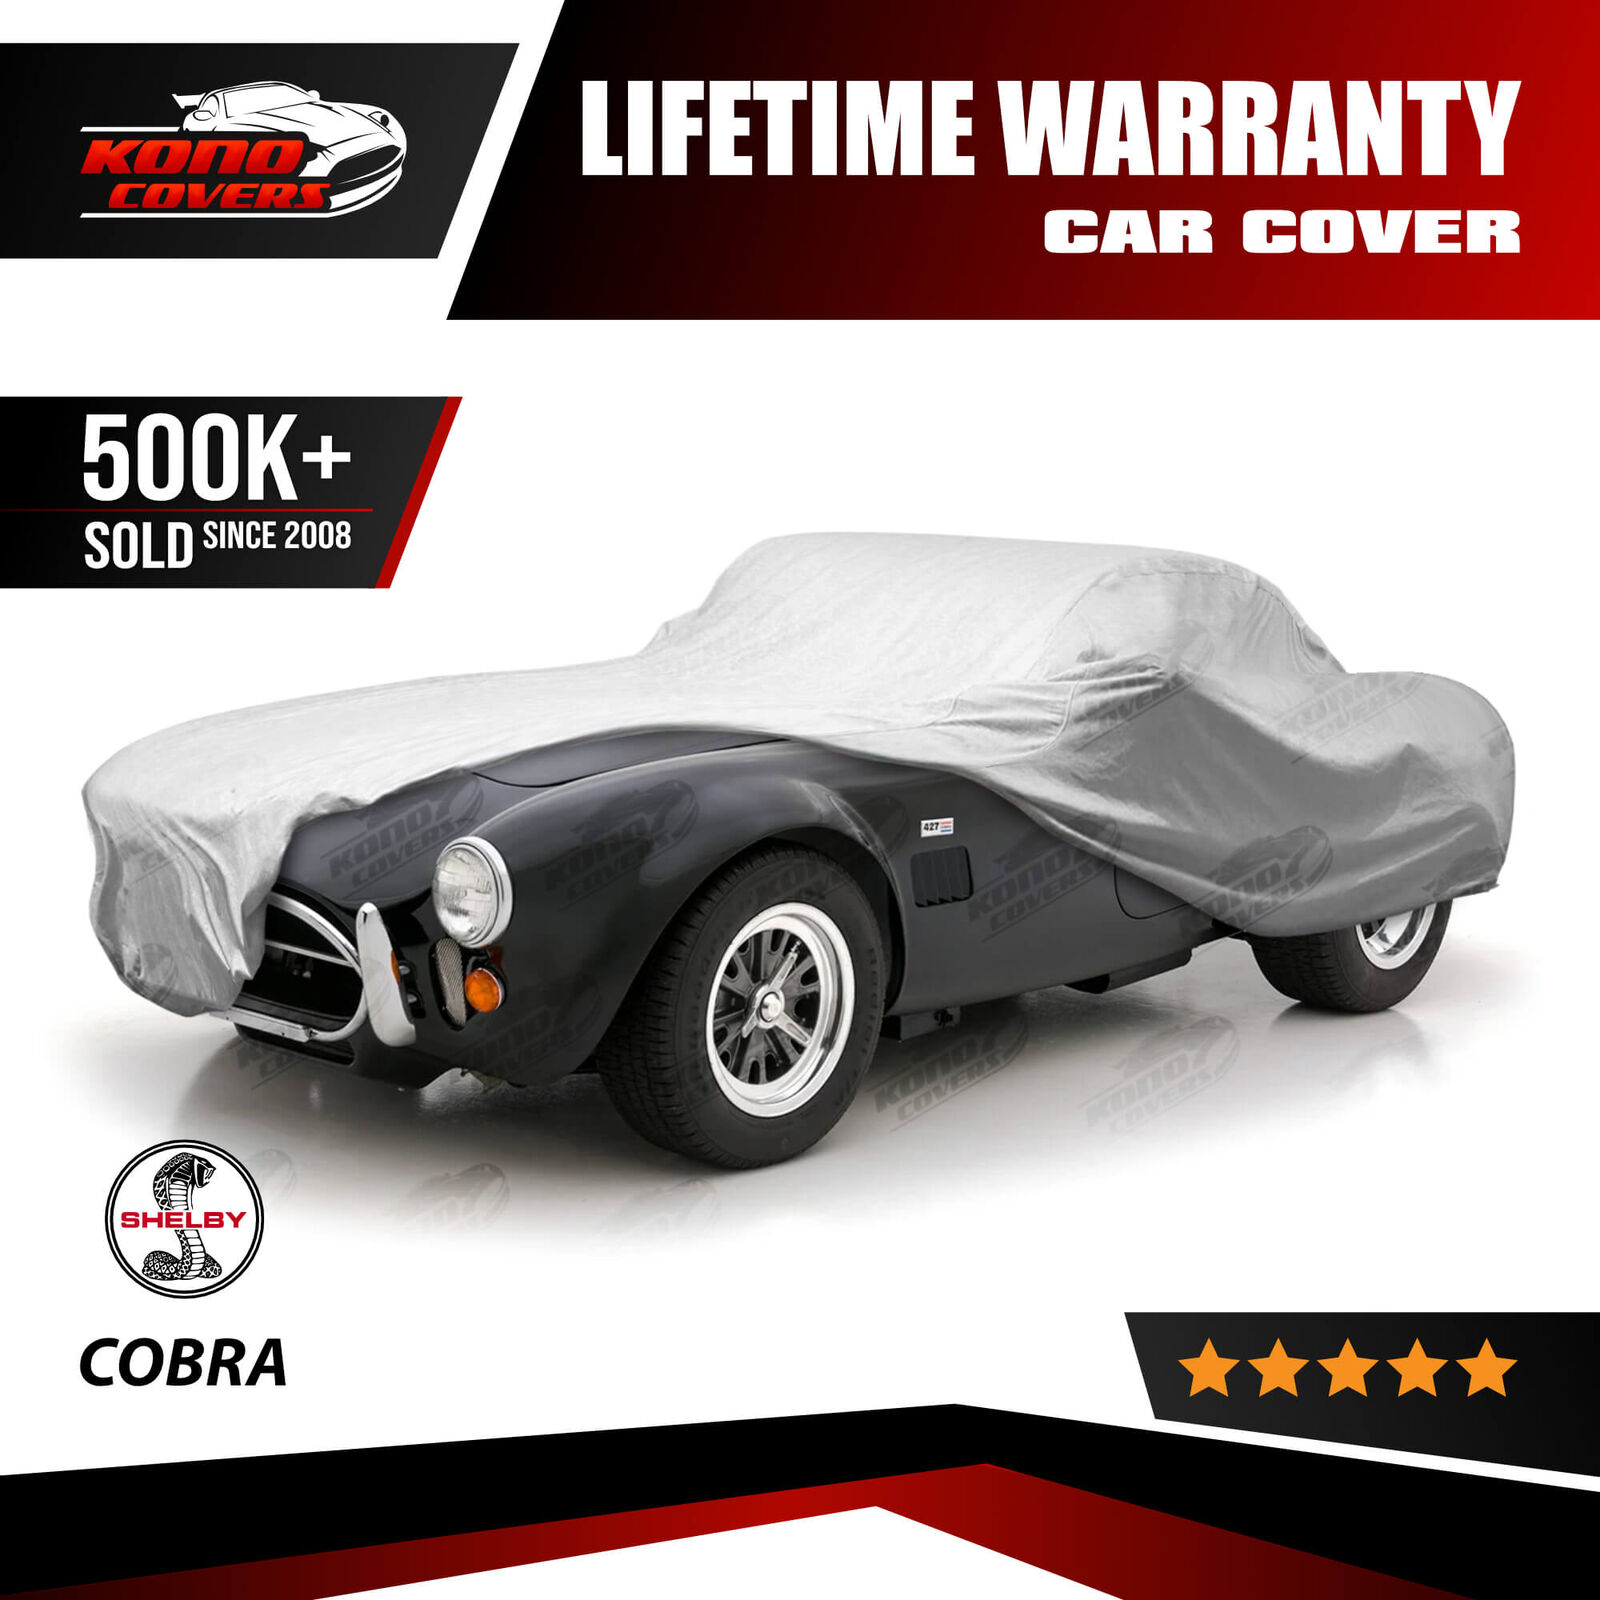 Shelby Cobra 5 Layer Waterproof Car Cover 1962 1963 1964 1965 1966 1967